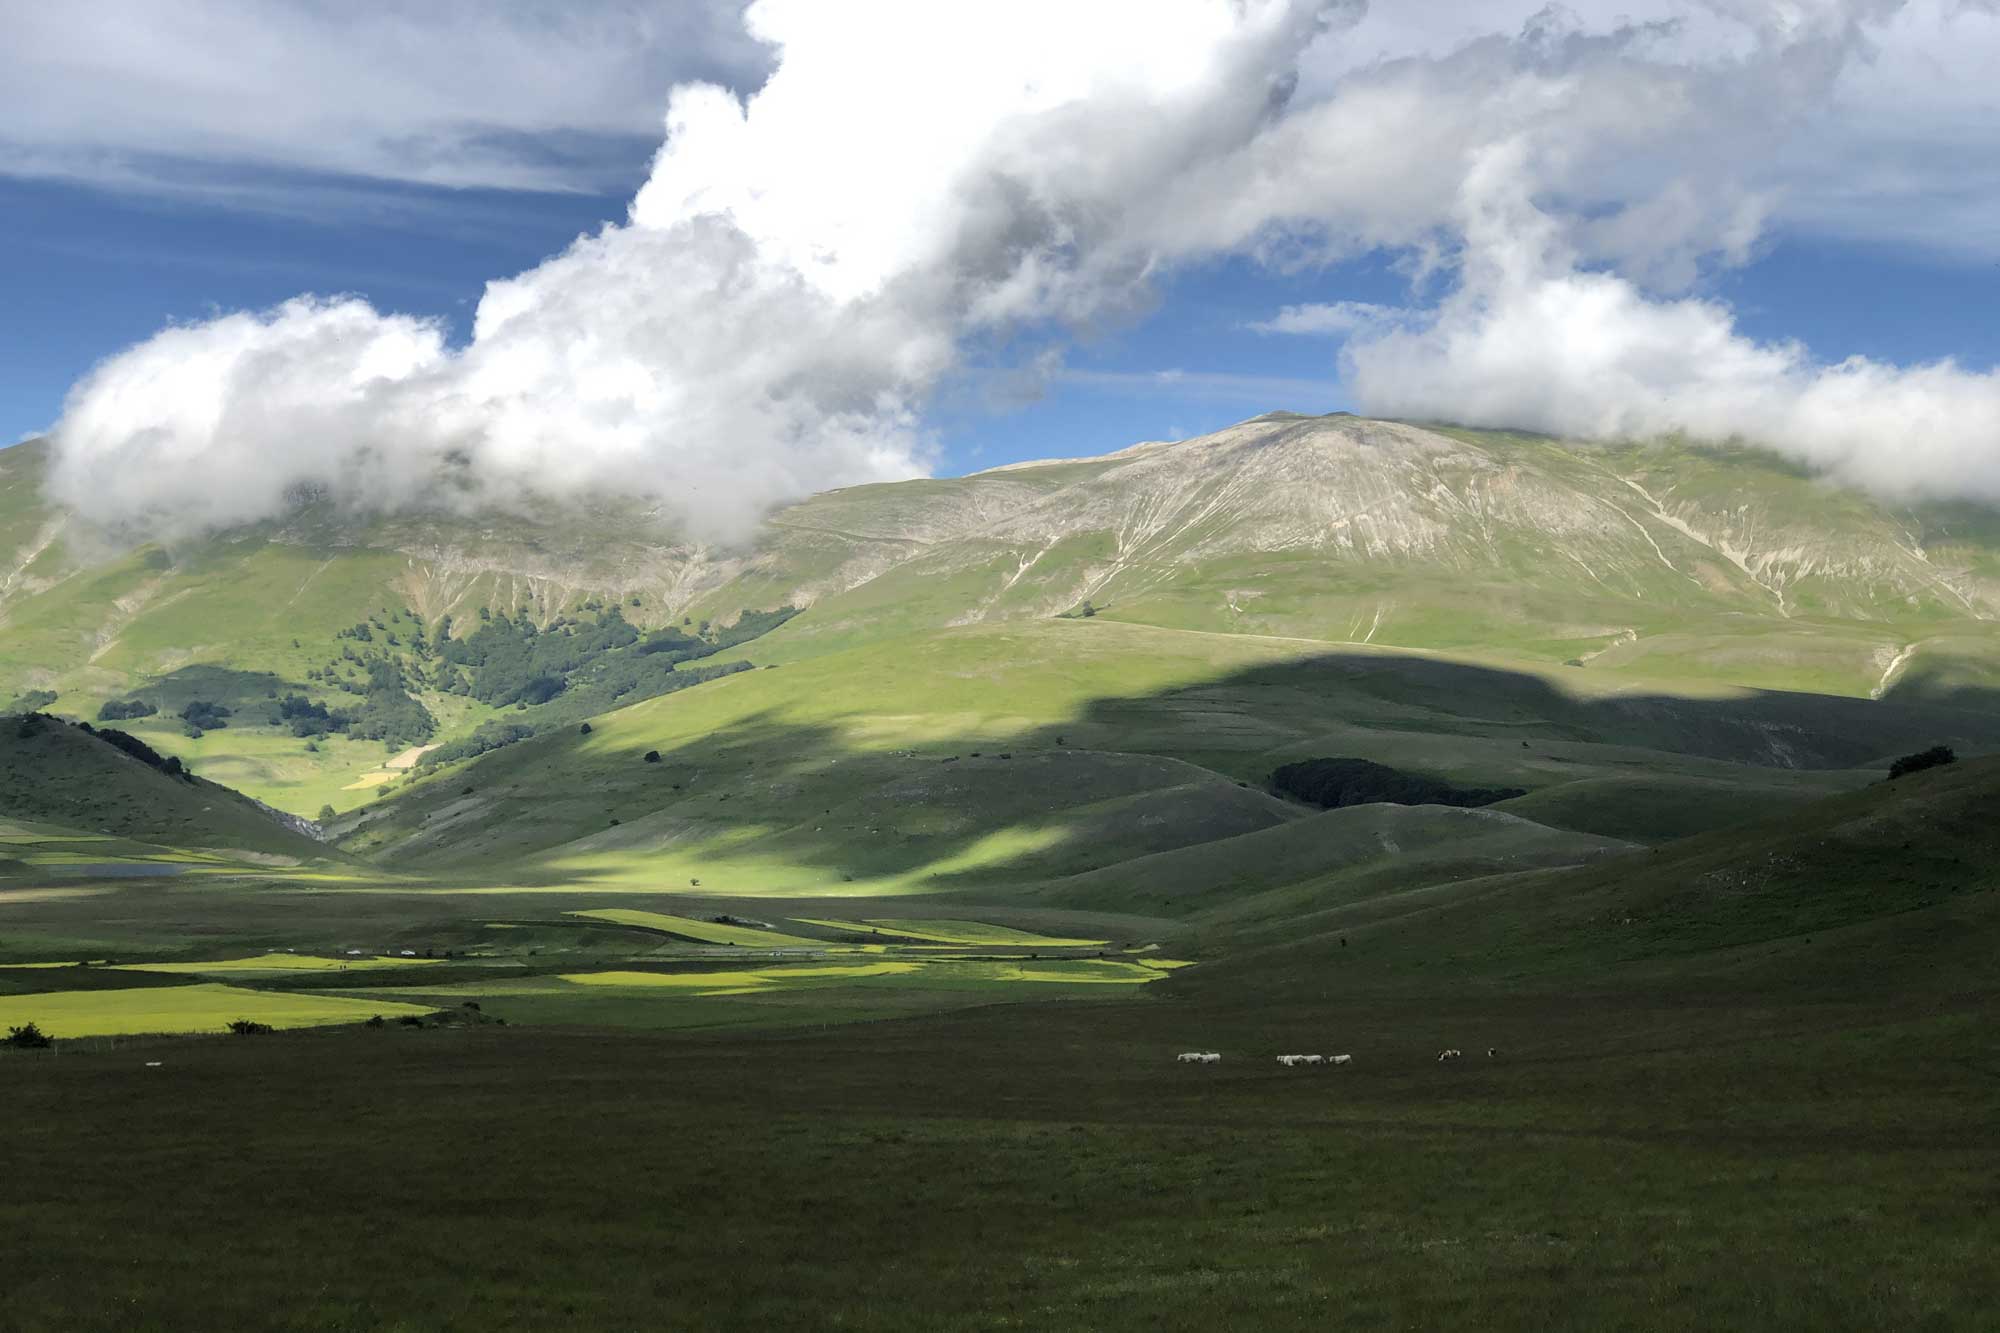 The Sibillini Mountains National Park